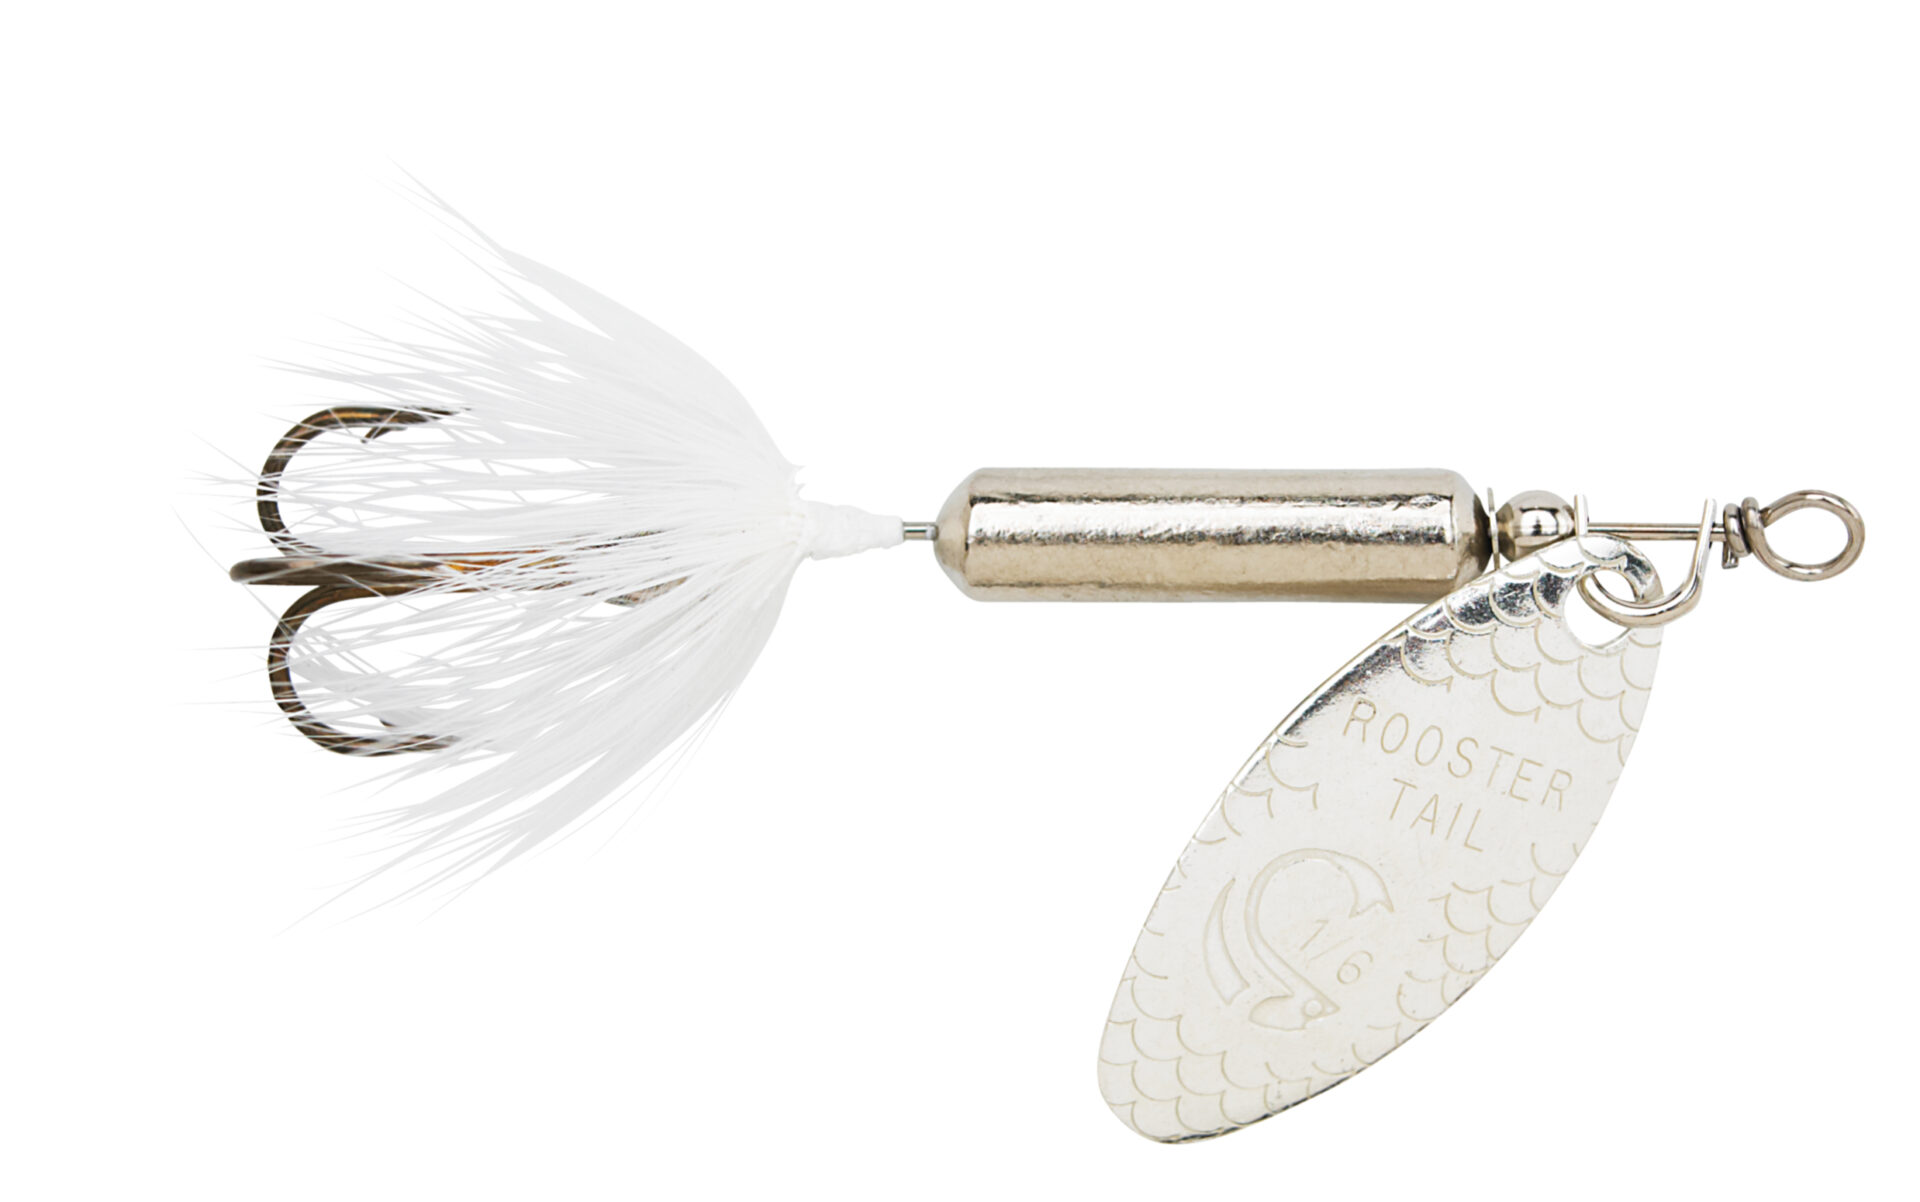 Wordens 212-FRB Rooster Tail in-Line Spinner, 2 3/4, 1/4 oz